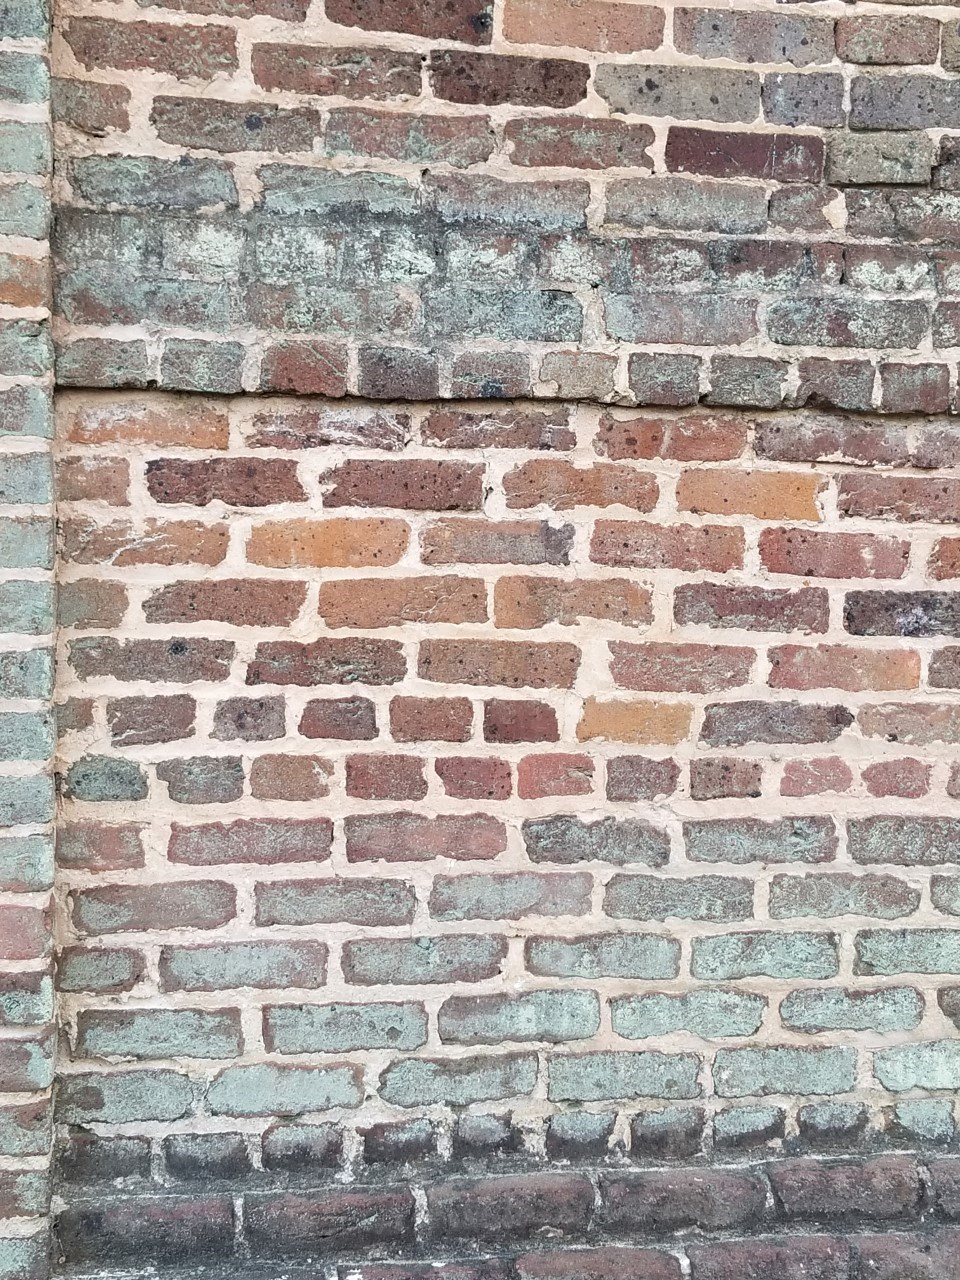 The image shows bricks from Thrasher Hall that were produced by former Tuskegee Institute (University) students. The bricks were made in “White Hall Valley” on the campus of Tuskegee University.